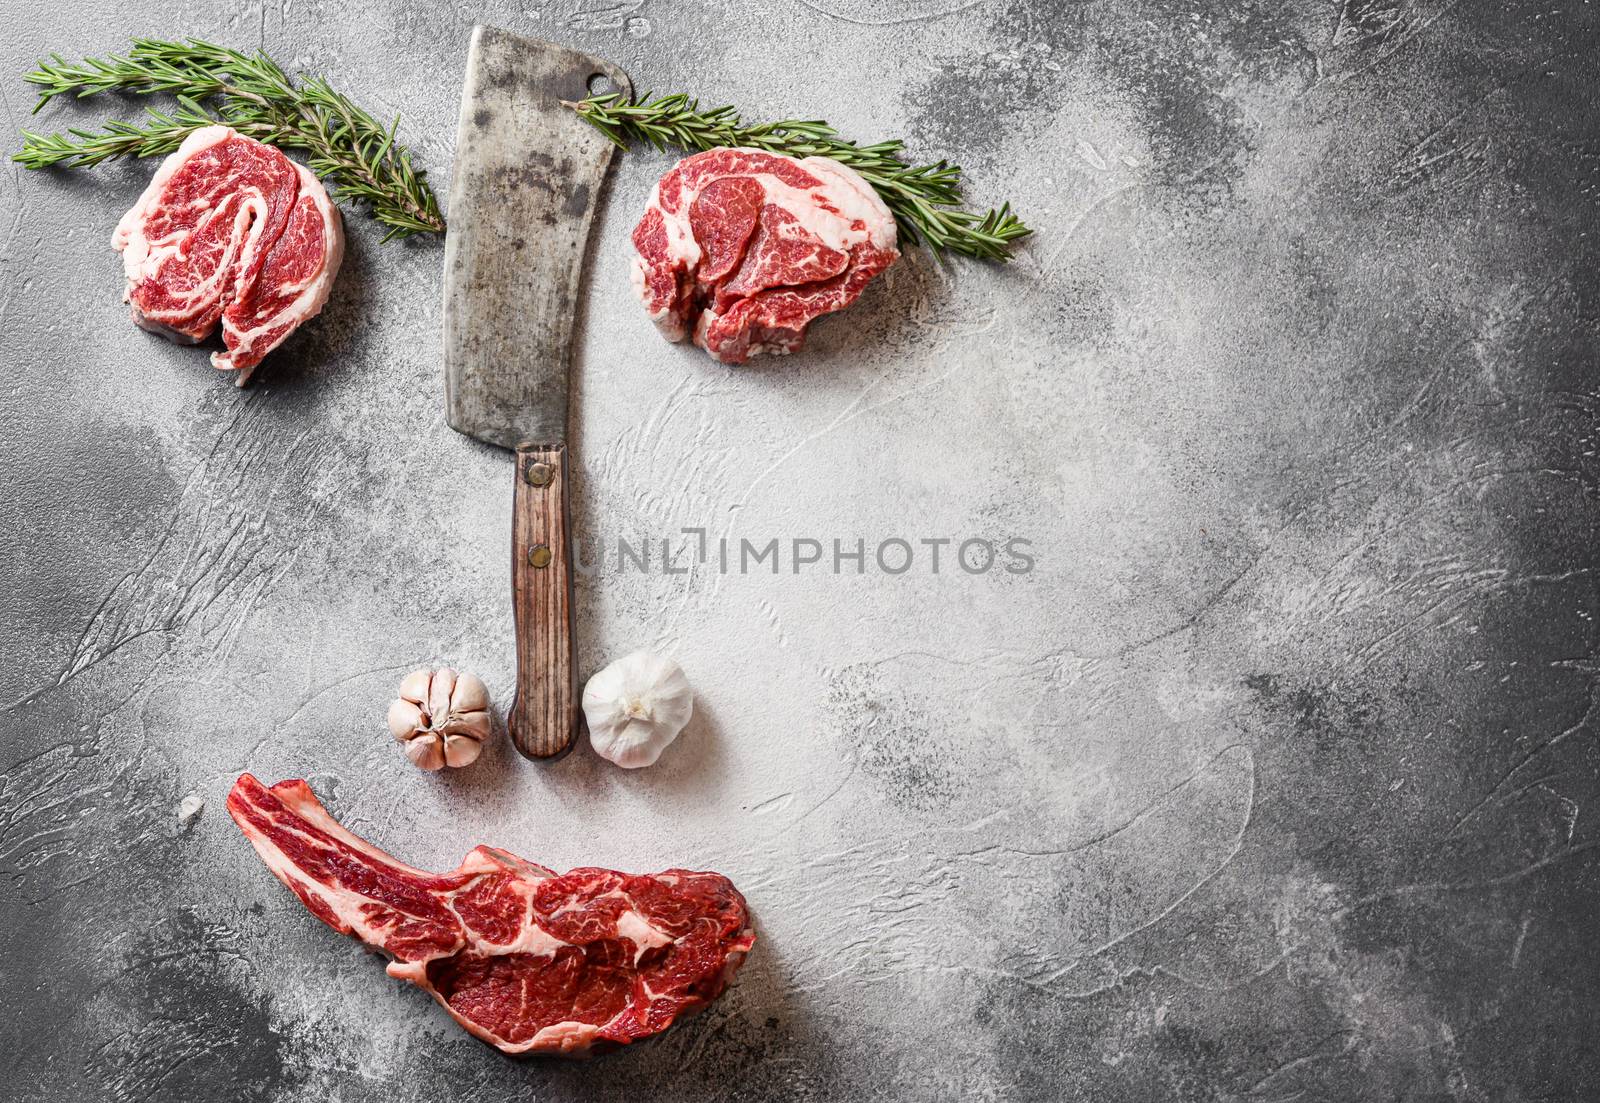 Various beef Cowboy steak happy face art style emotion with space for text. or Ribeye Steak, BoneIn, with chuck eye roll cut with the meat american cleaver knife over grey stone table slate cutting top view sad face styled art with seasonings, tomatoes, garlic, rosemary by Ilianesolenyi